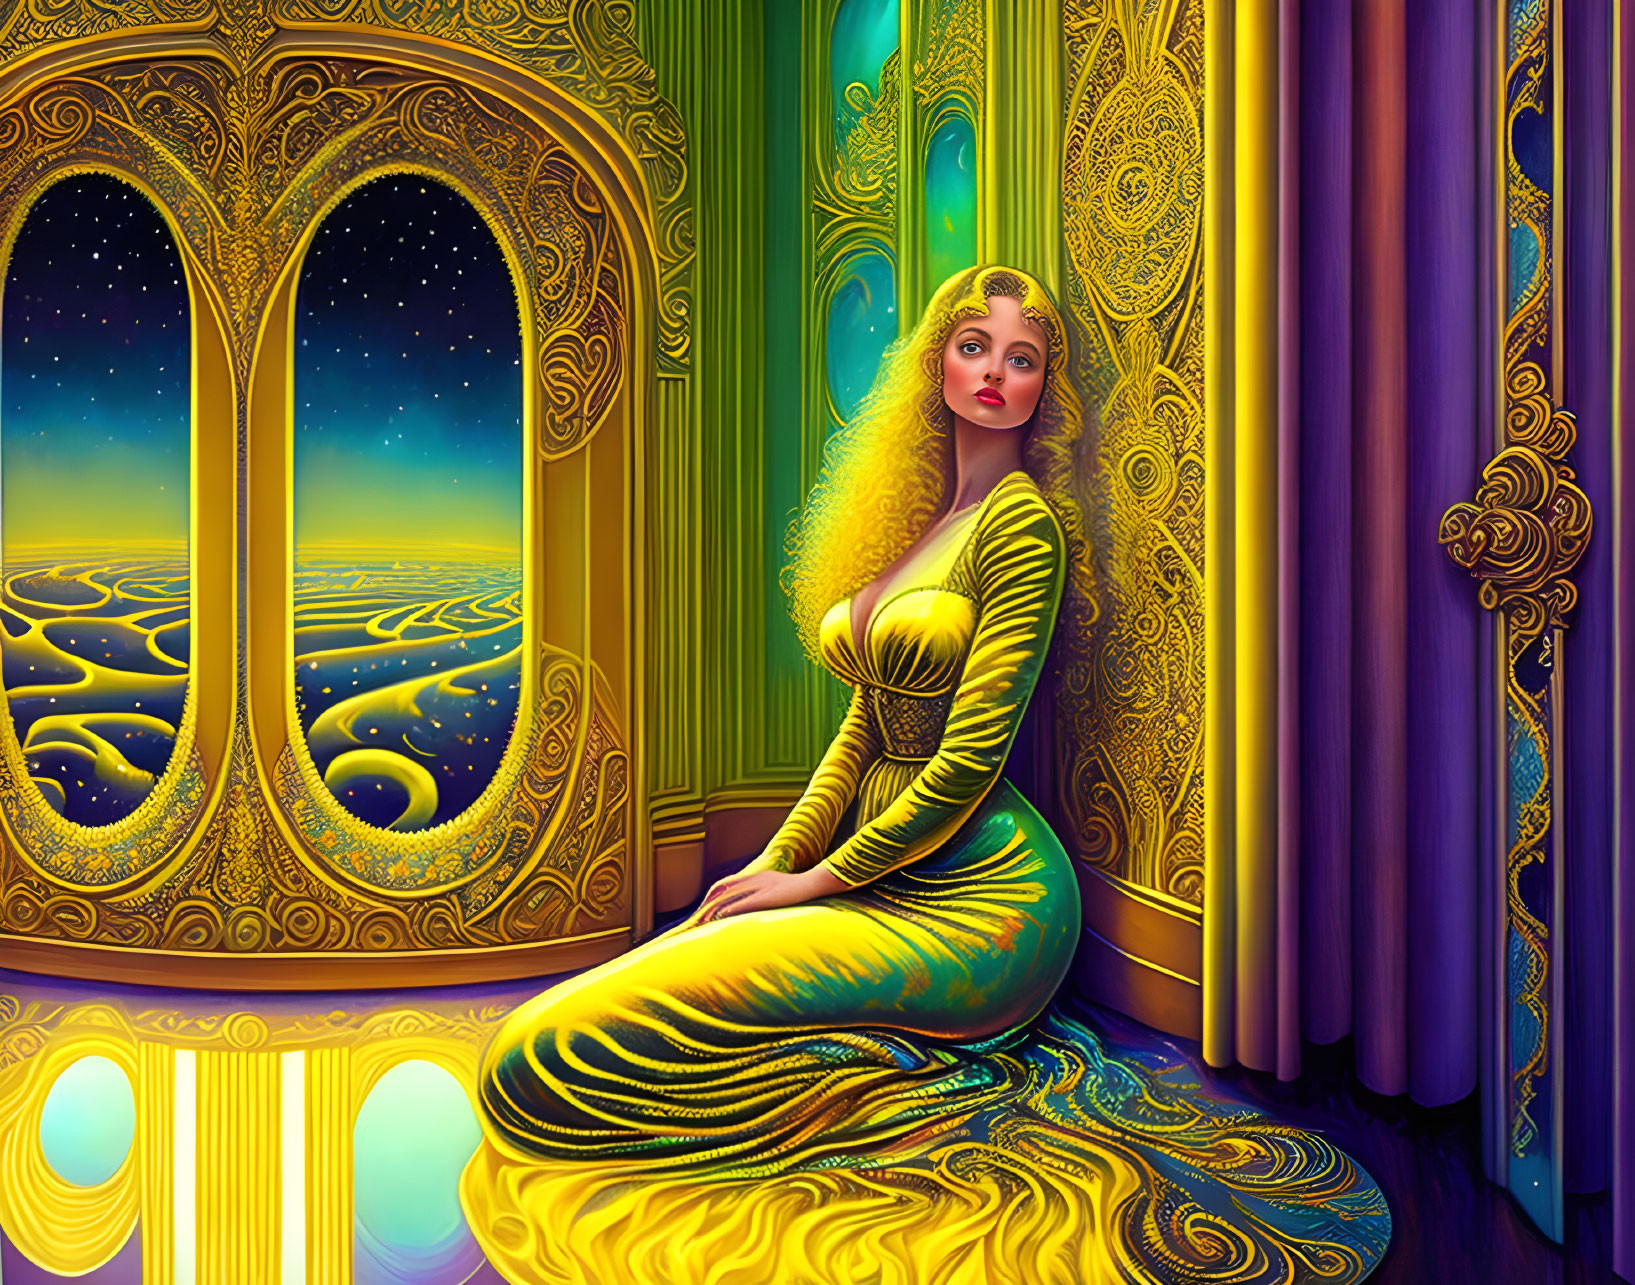 Golden-haired woman in vibrant, fantasy-themed room with swirling patterns and starry windows